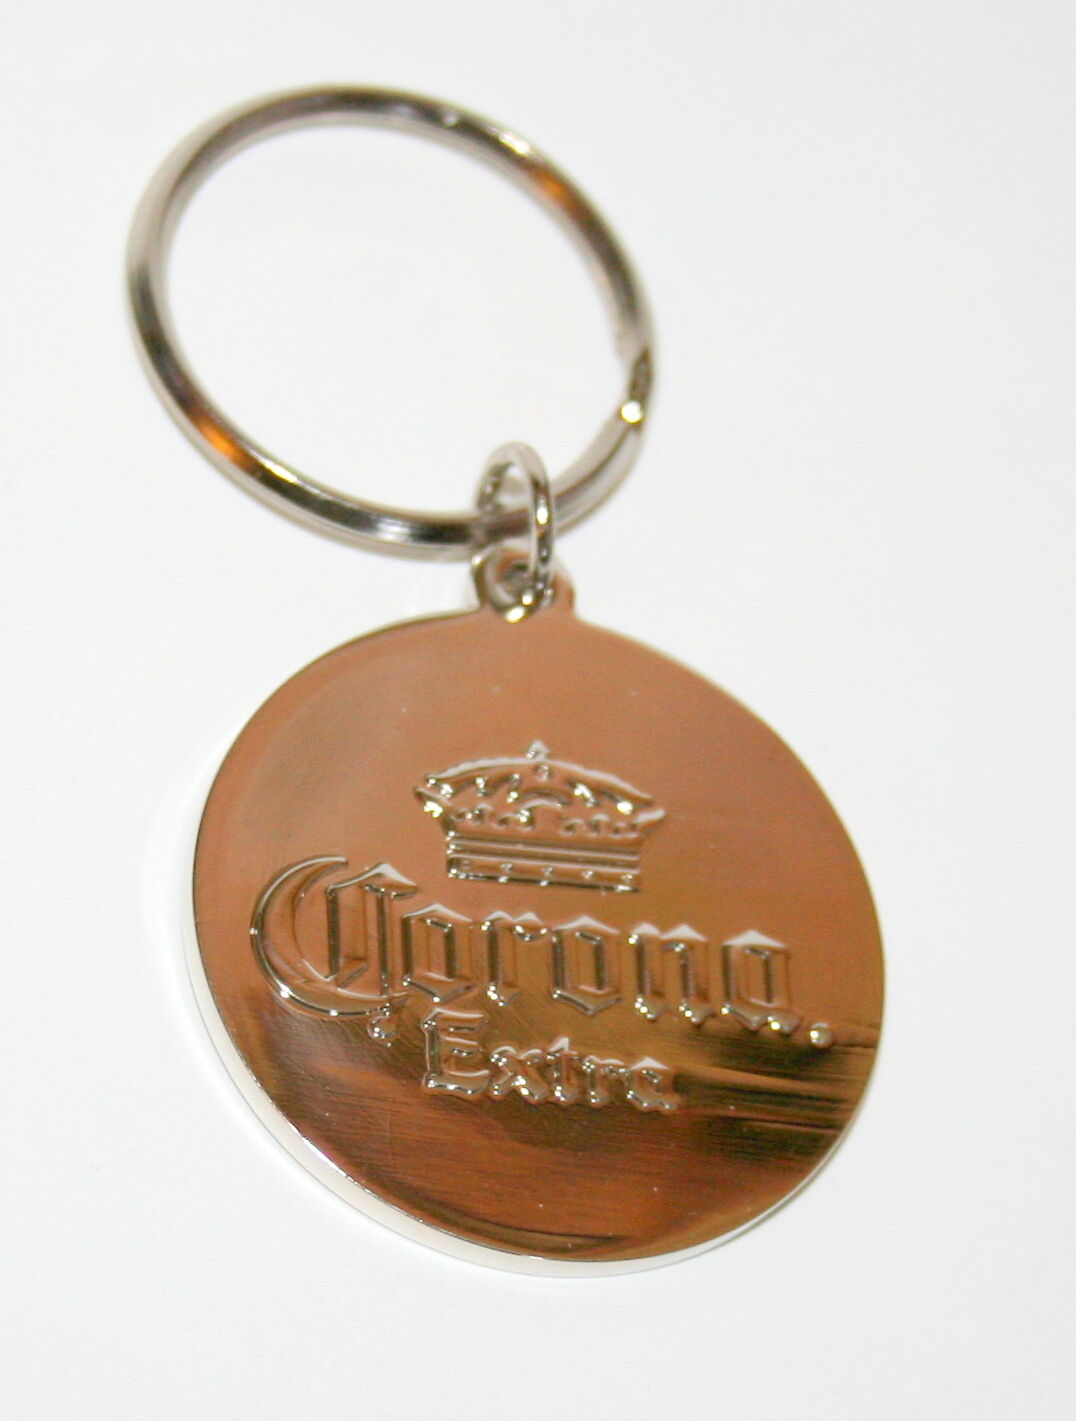 Corona Light / Extra Beer Advertising Promo Metal Key Chain New 2 sided